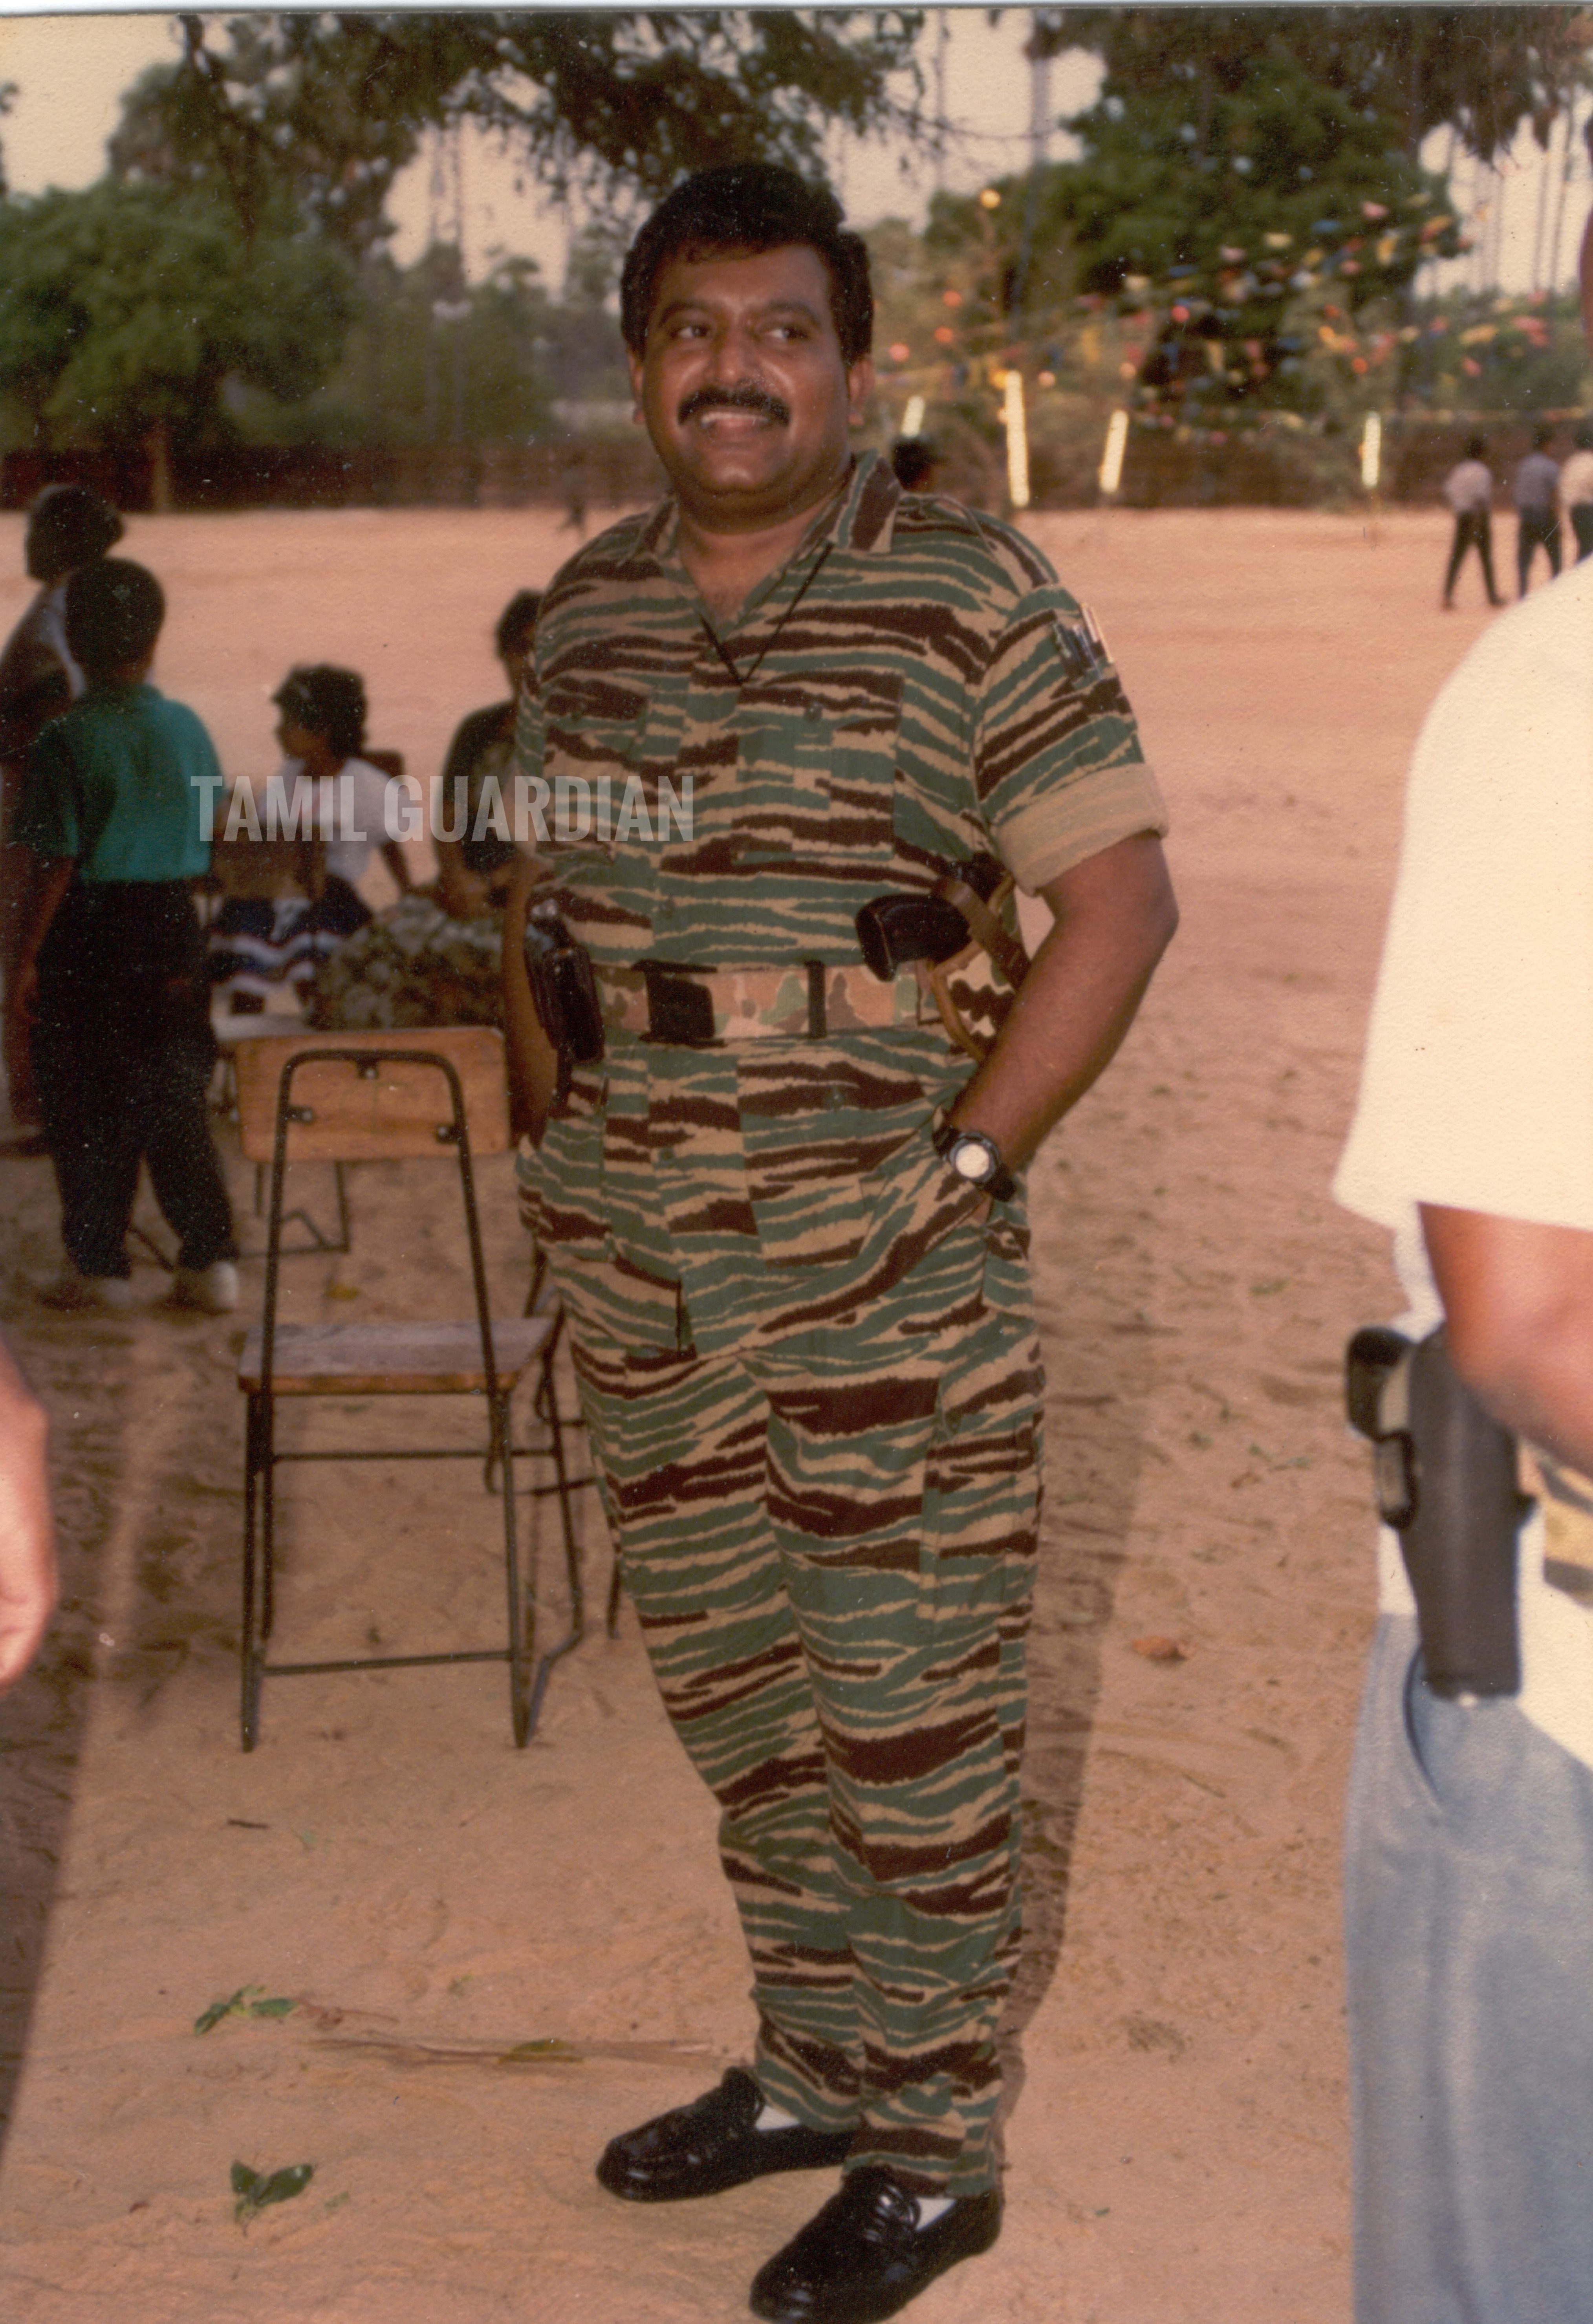 45 years since the birth of the LTTE | Tamil Guardian